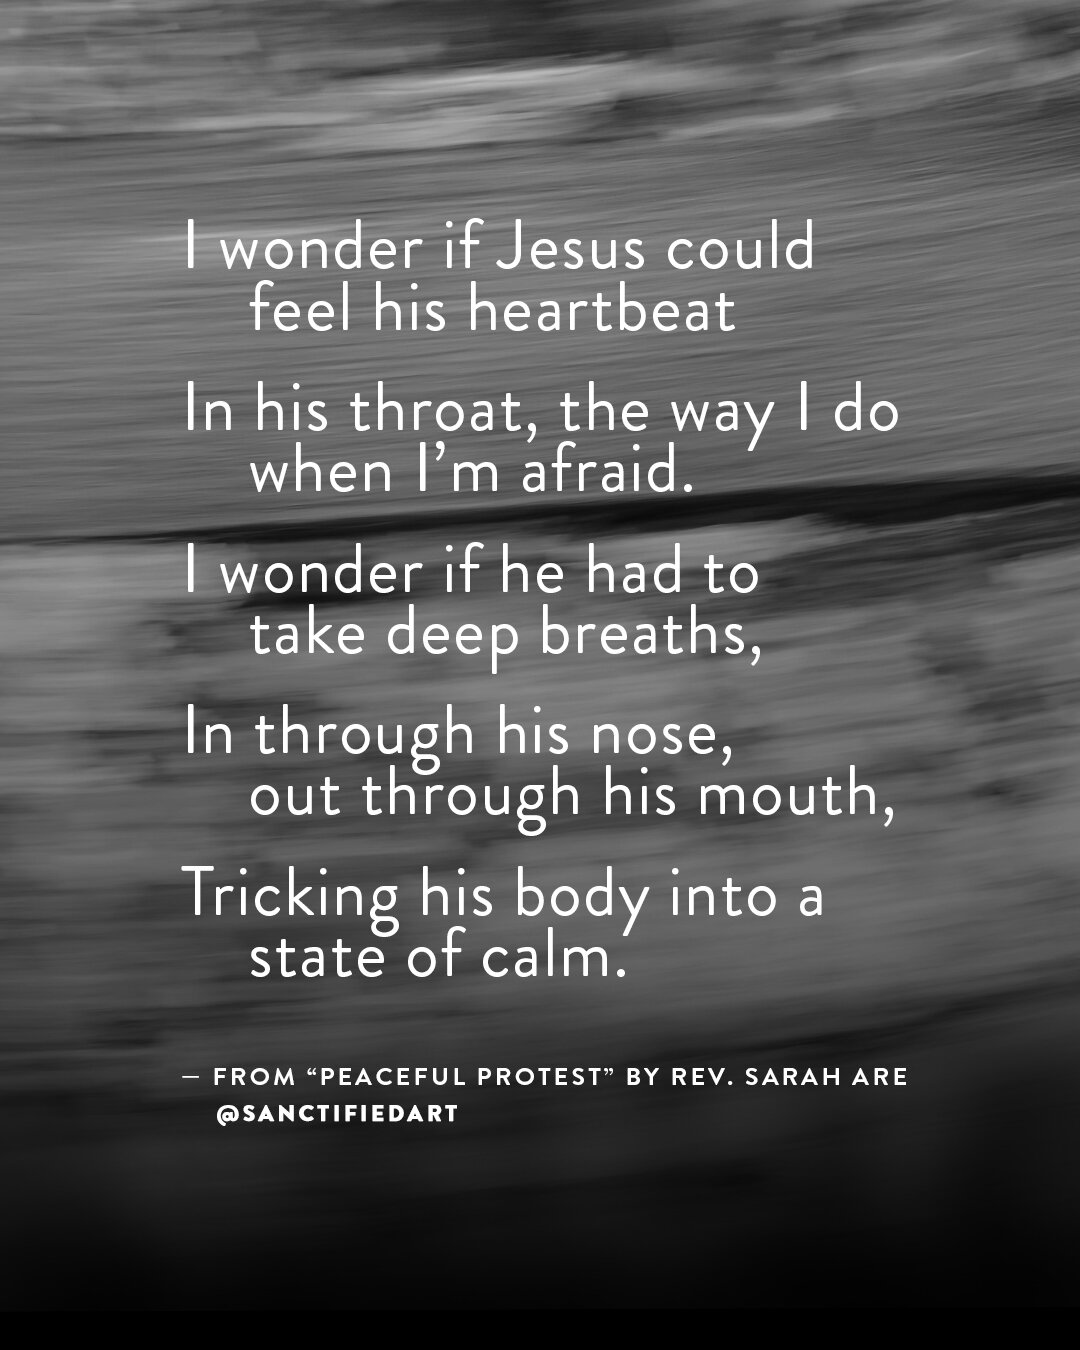 &ldquo;I wonder if Jesus could feel his heartbeat
In his throat, the way I do when I&rsquo;m afraid.
I wonder if he had to take deep breaths,
In through his nose, out through his mouth,
Tricking his body into a state of calm.
I wonder if he was nause